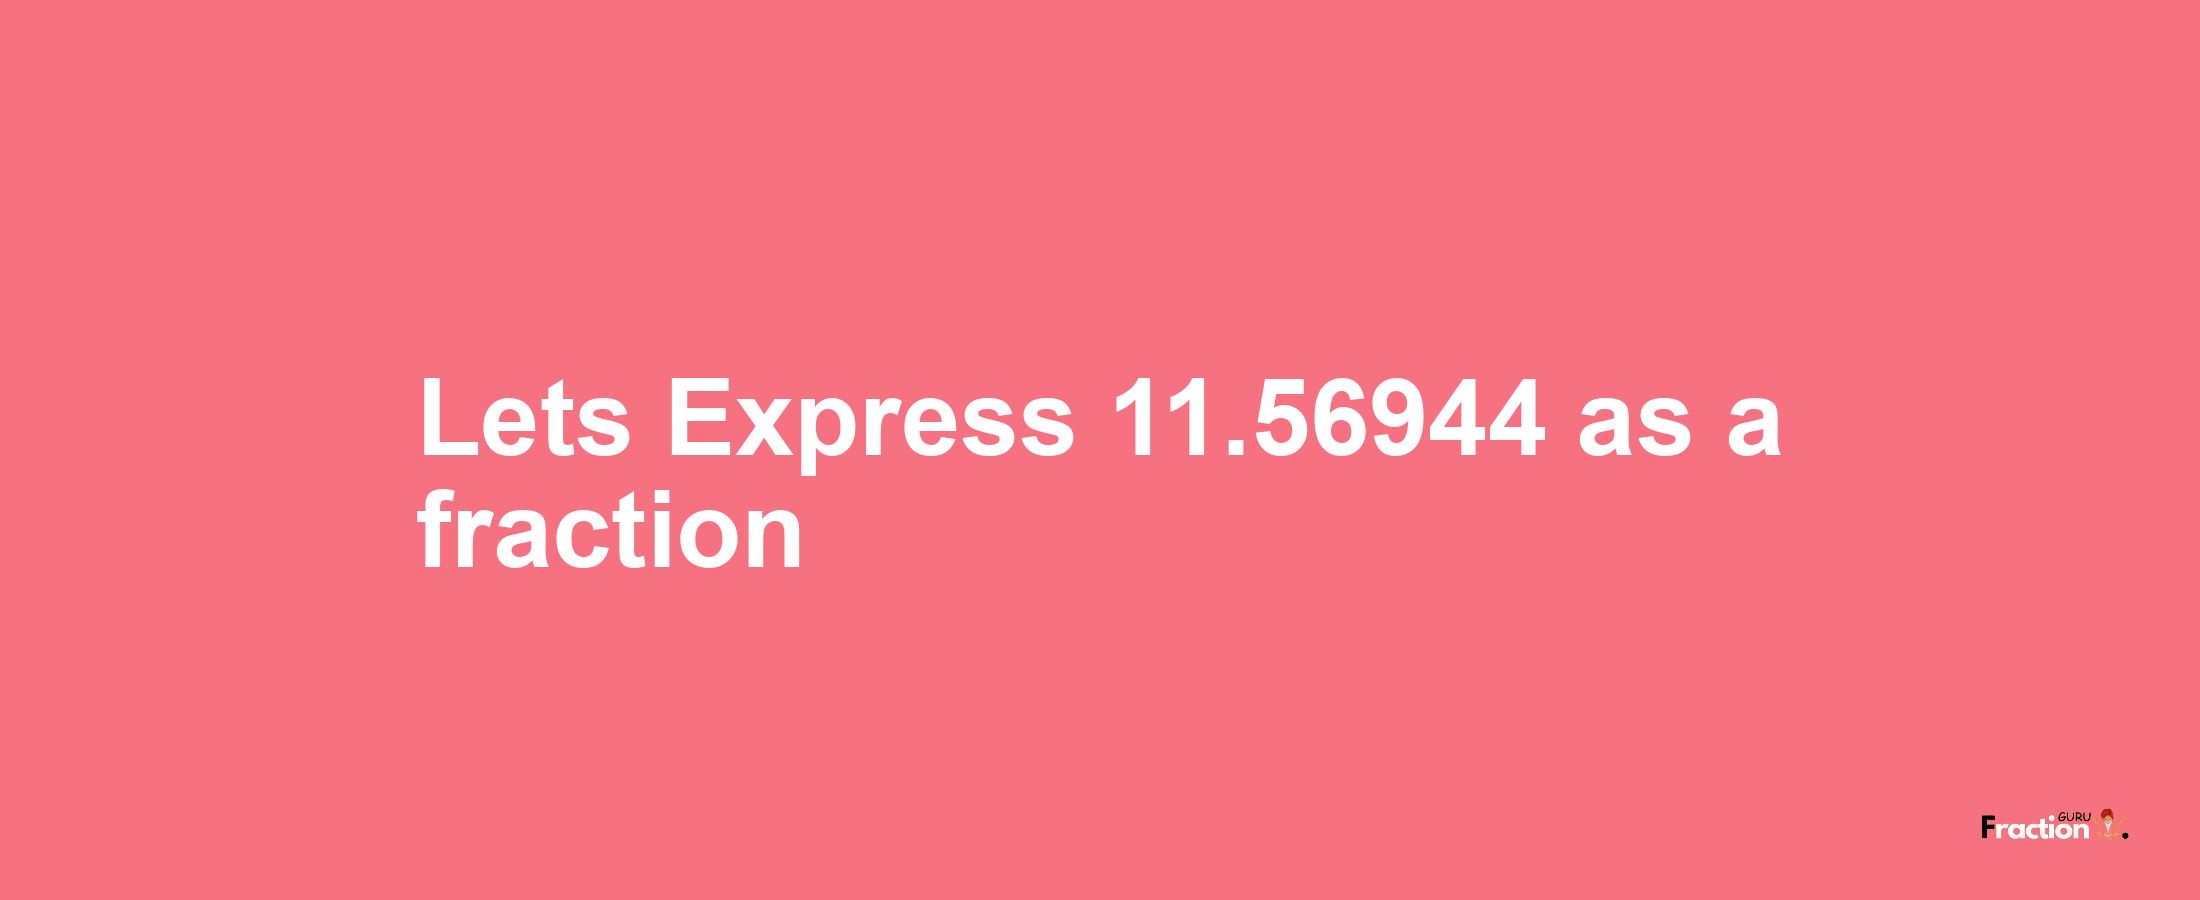 Lets Express 11.56944 as afraction